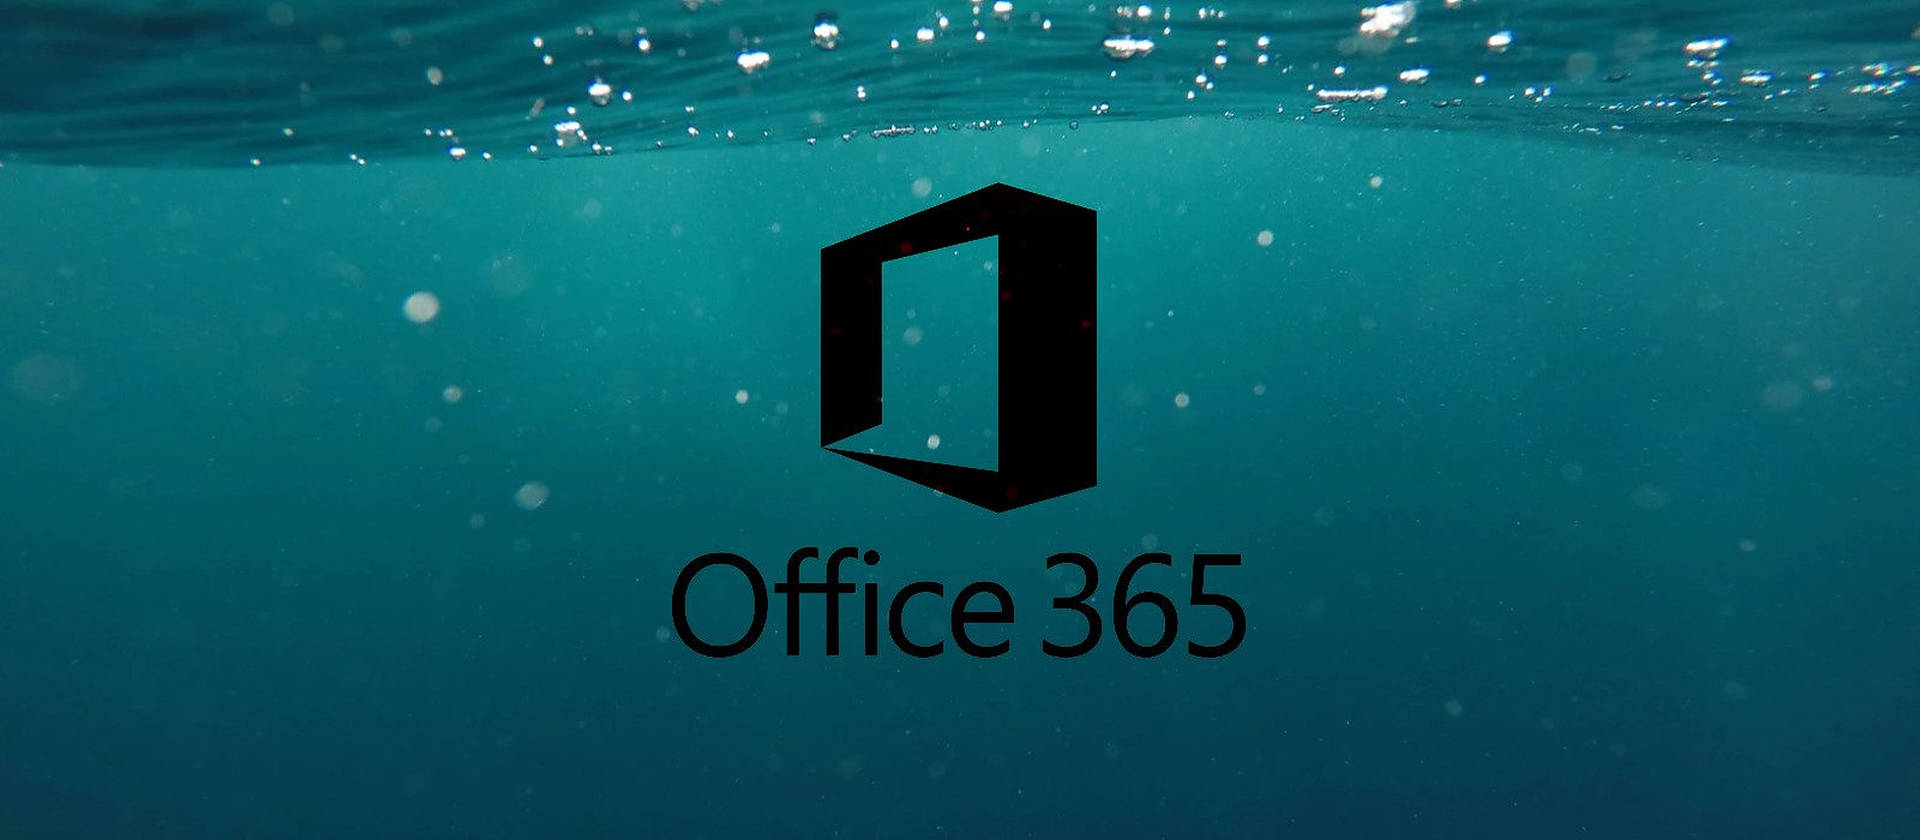 Office 365 Teal Poster